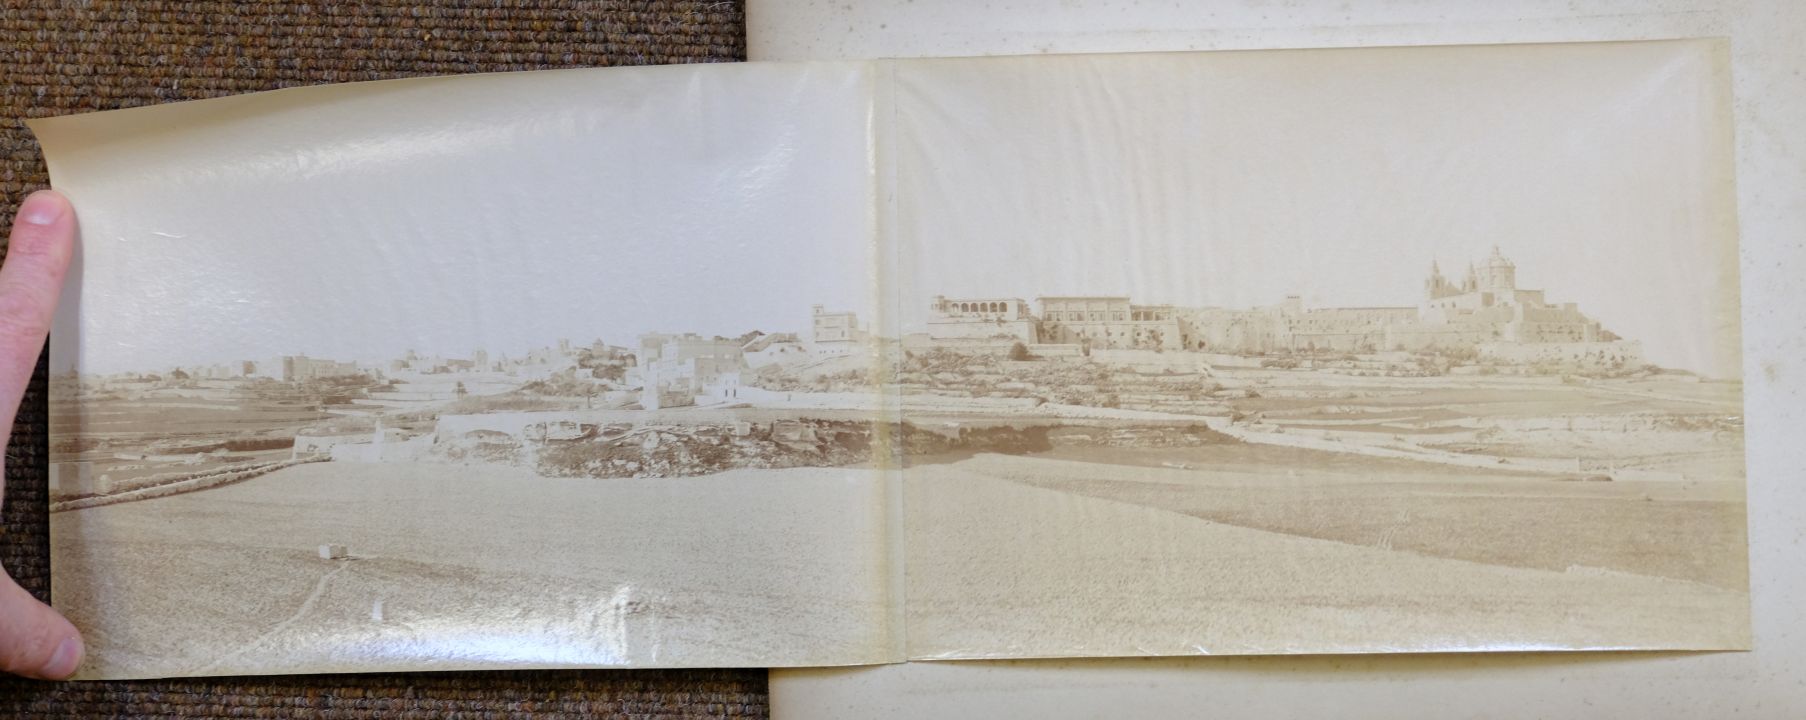 *Malta. A collection of 53 views, c. 1880s, albumen print photographs, a total of 53 photographs - Image 8 of 11